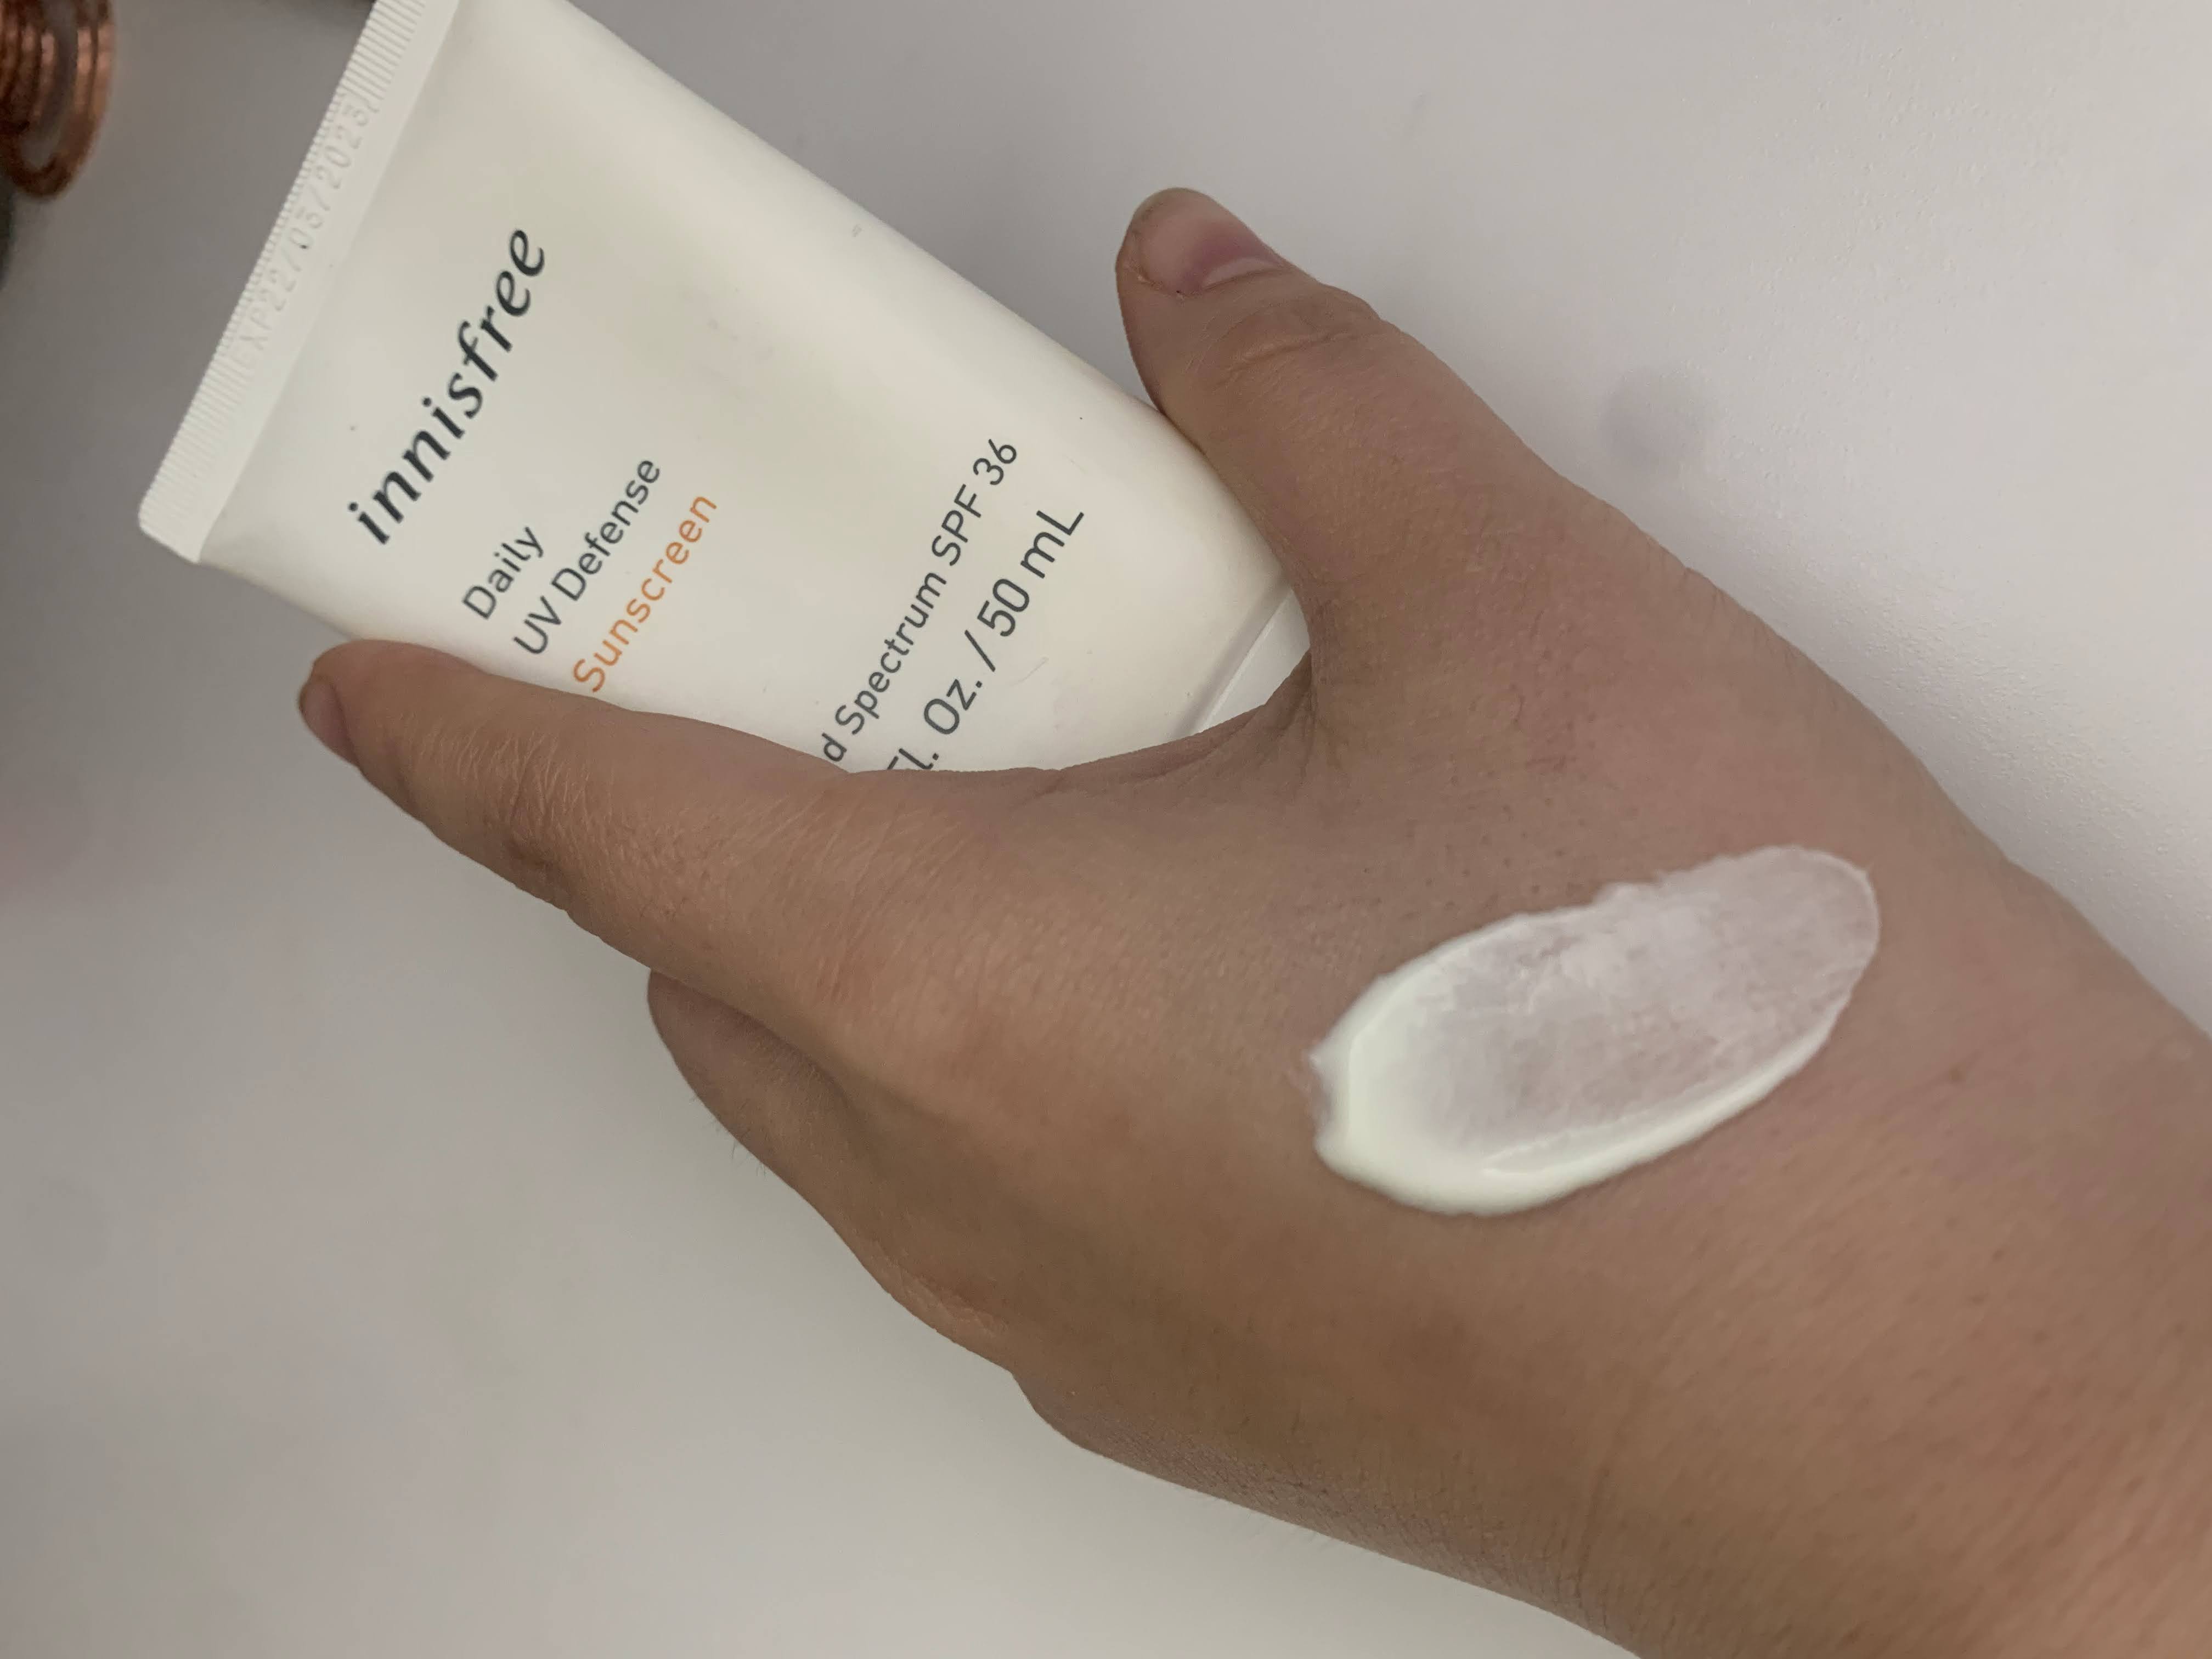 Innisfree Sunscreen Swatched on hand